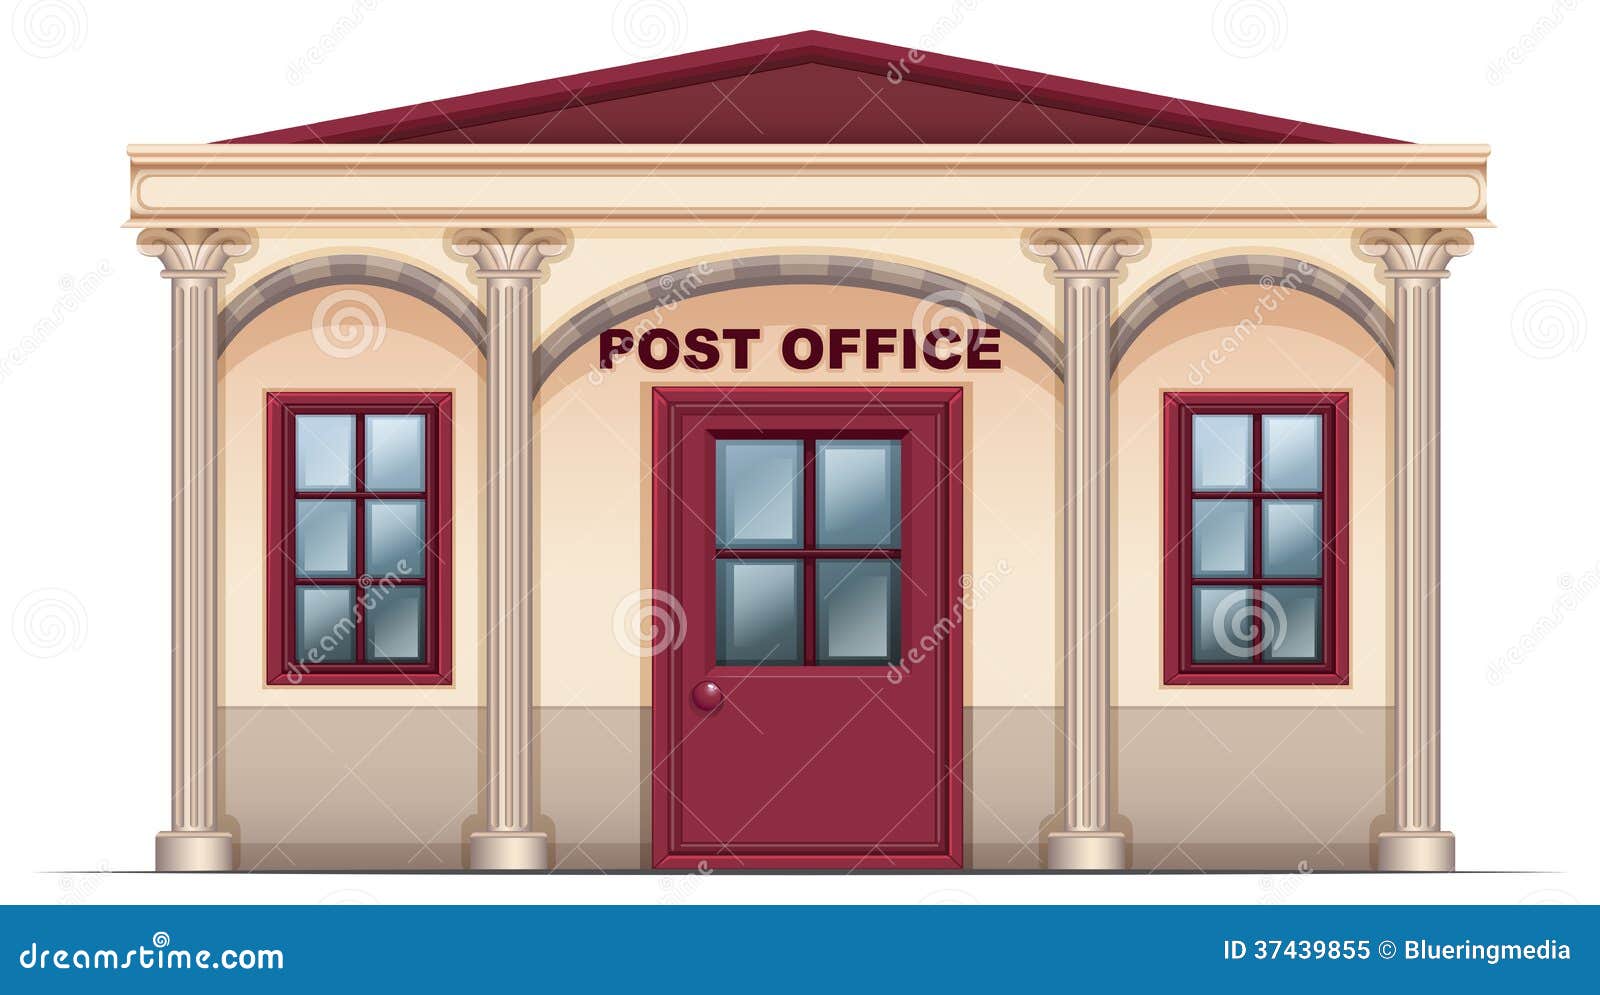 free clipart post office - photo #15